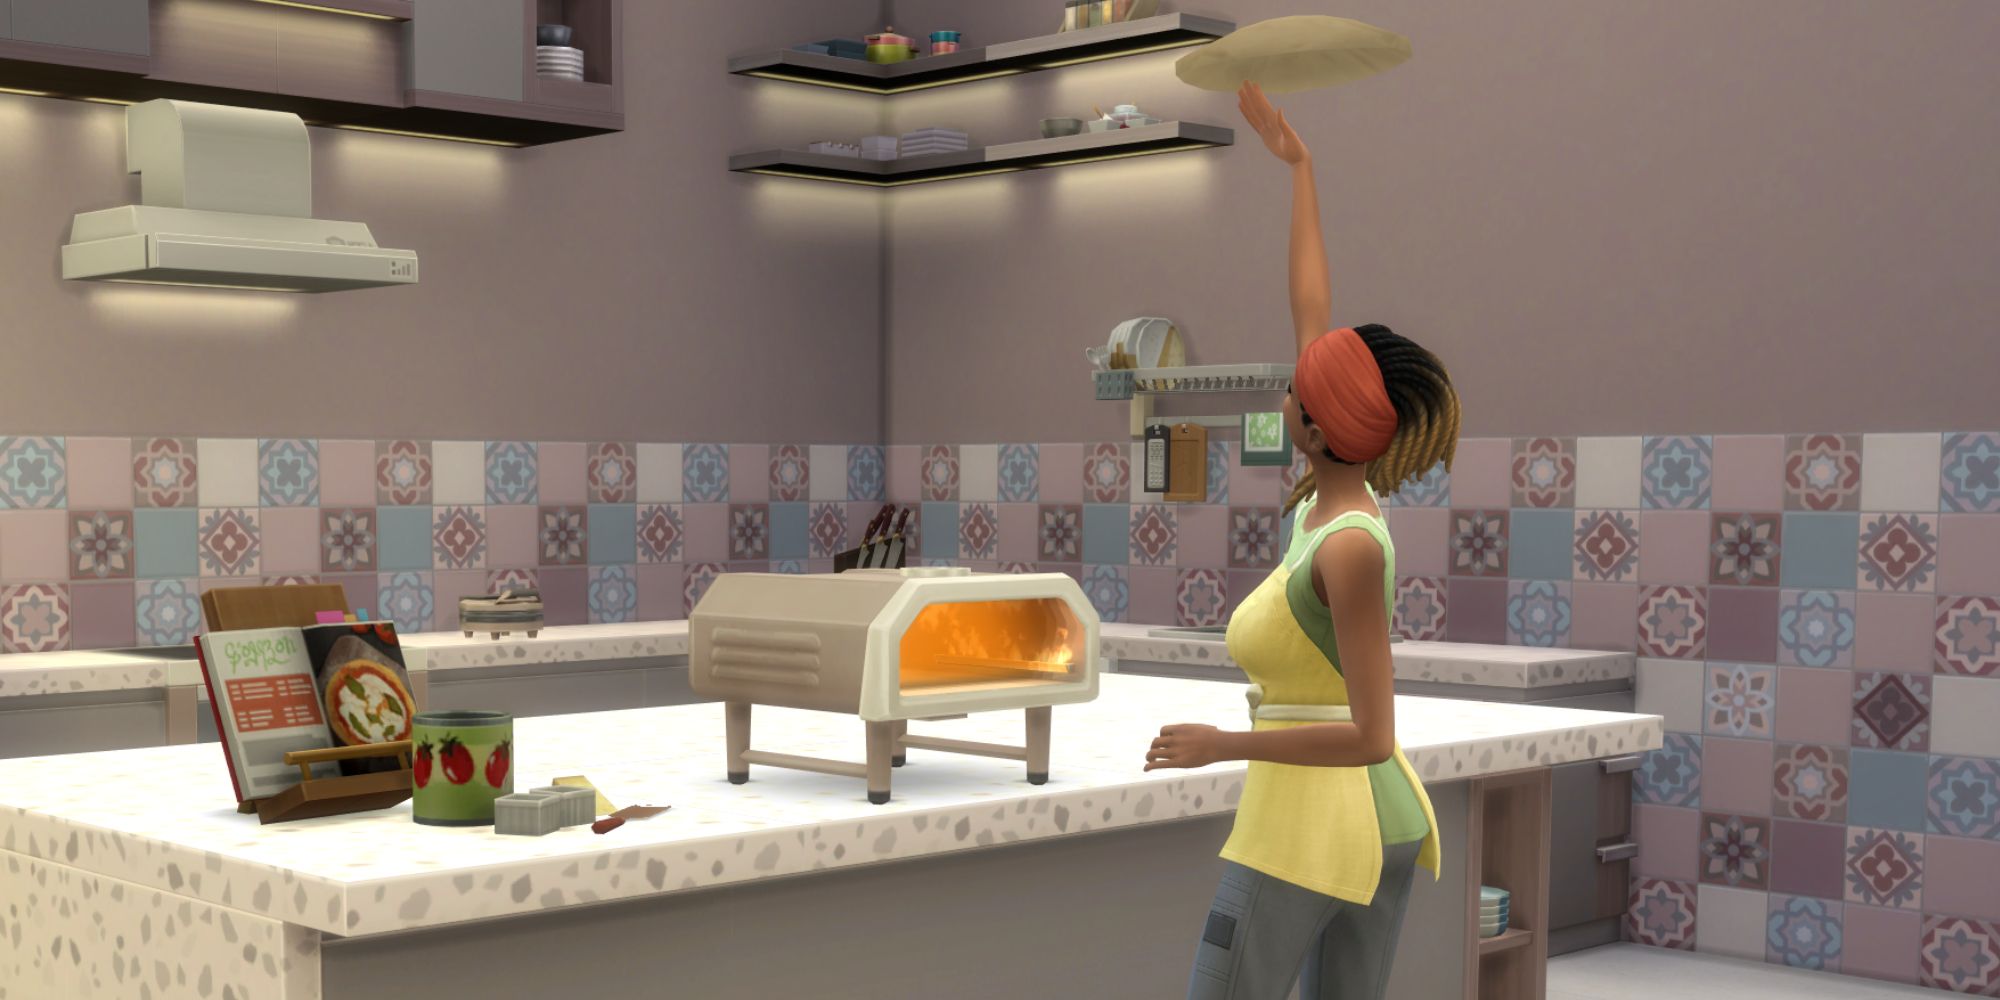 The Sims 4 HCH a sim spinning dough in the kitchen